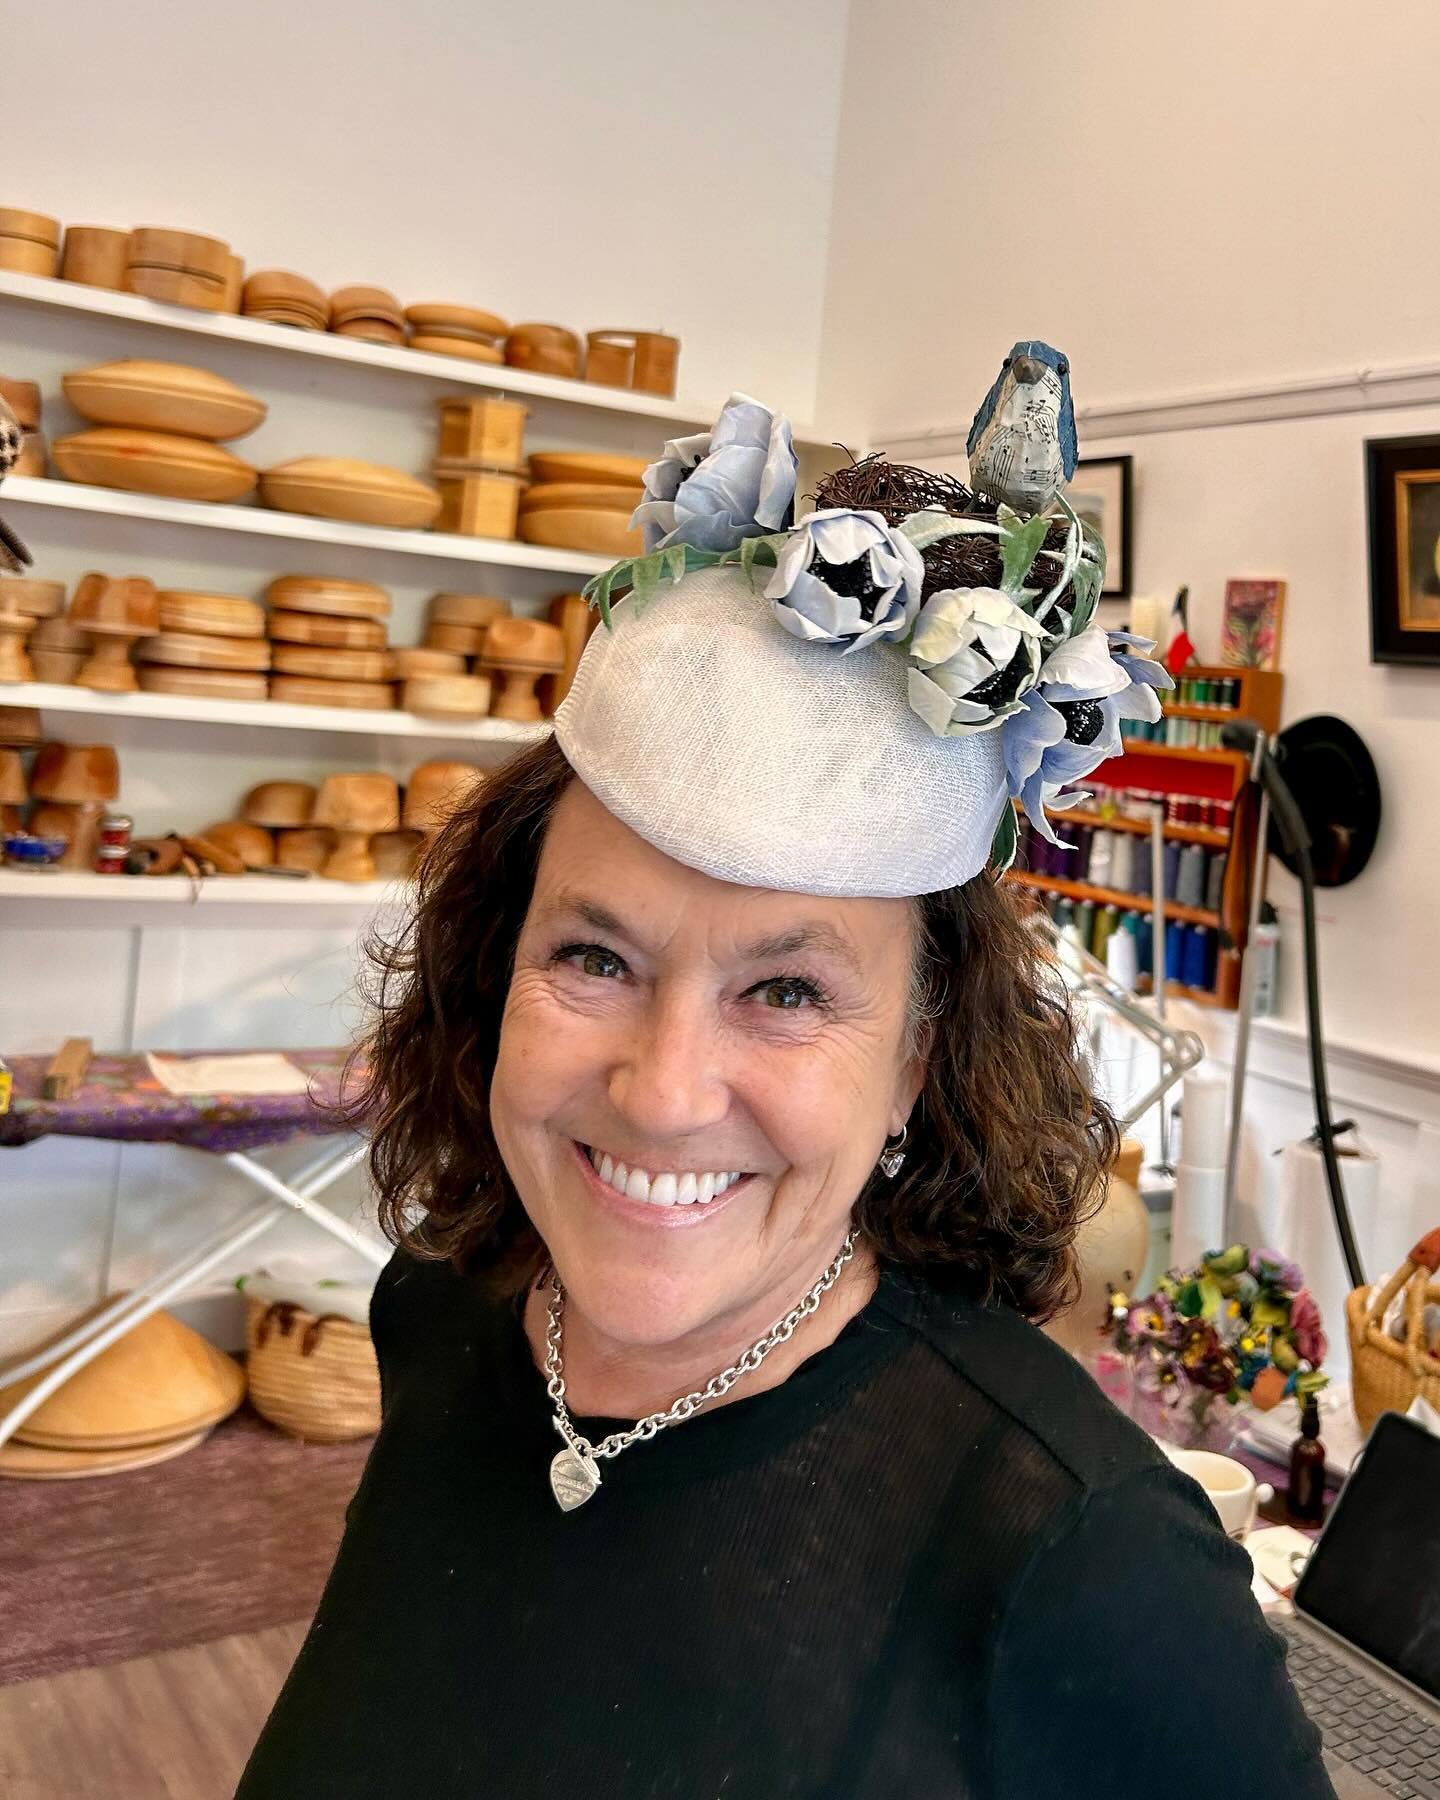 Custom bird and Italian anemones fascinator for the Central Park Ladies Conservancy Luncheon. A fabulous collaborative project with a lovely and talented customer. #shopmarin #shopsananselmo @milliners_guild #silkflowers #customfascinator #bespokefas